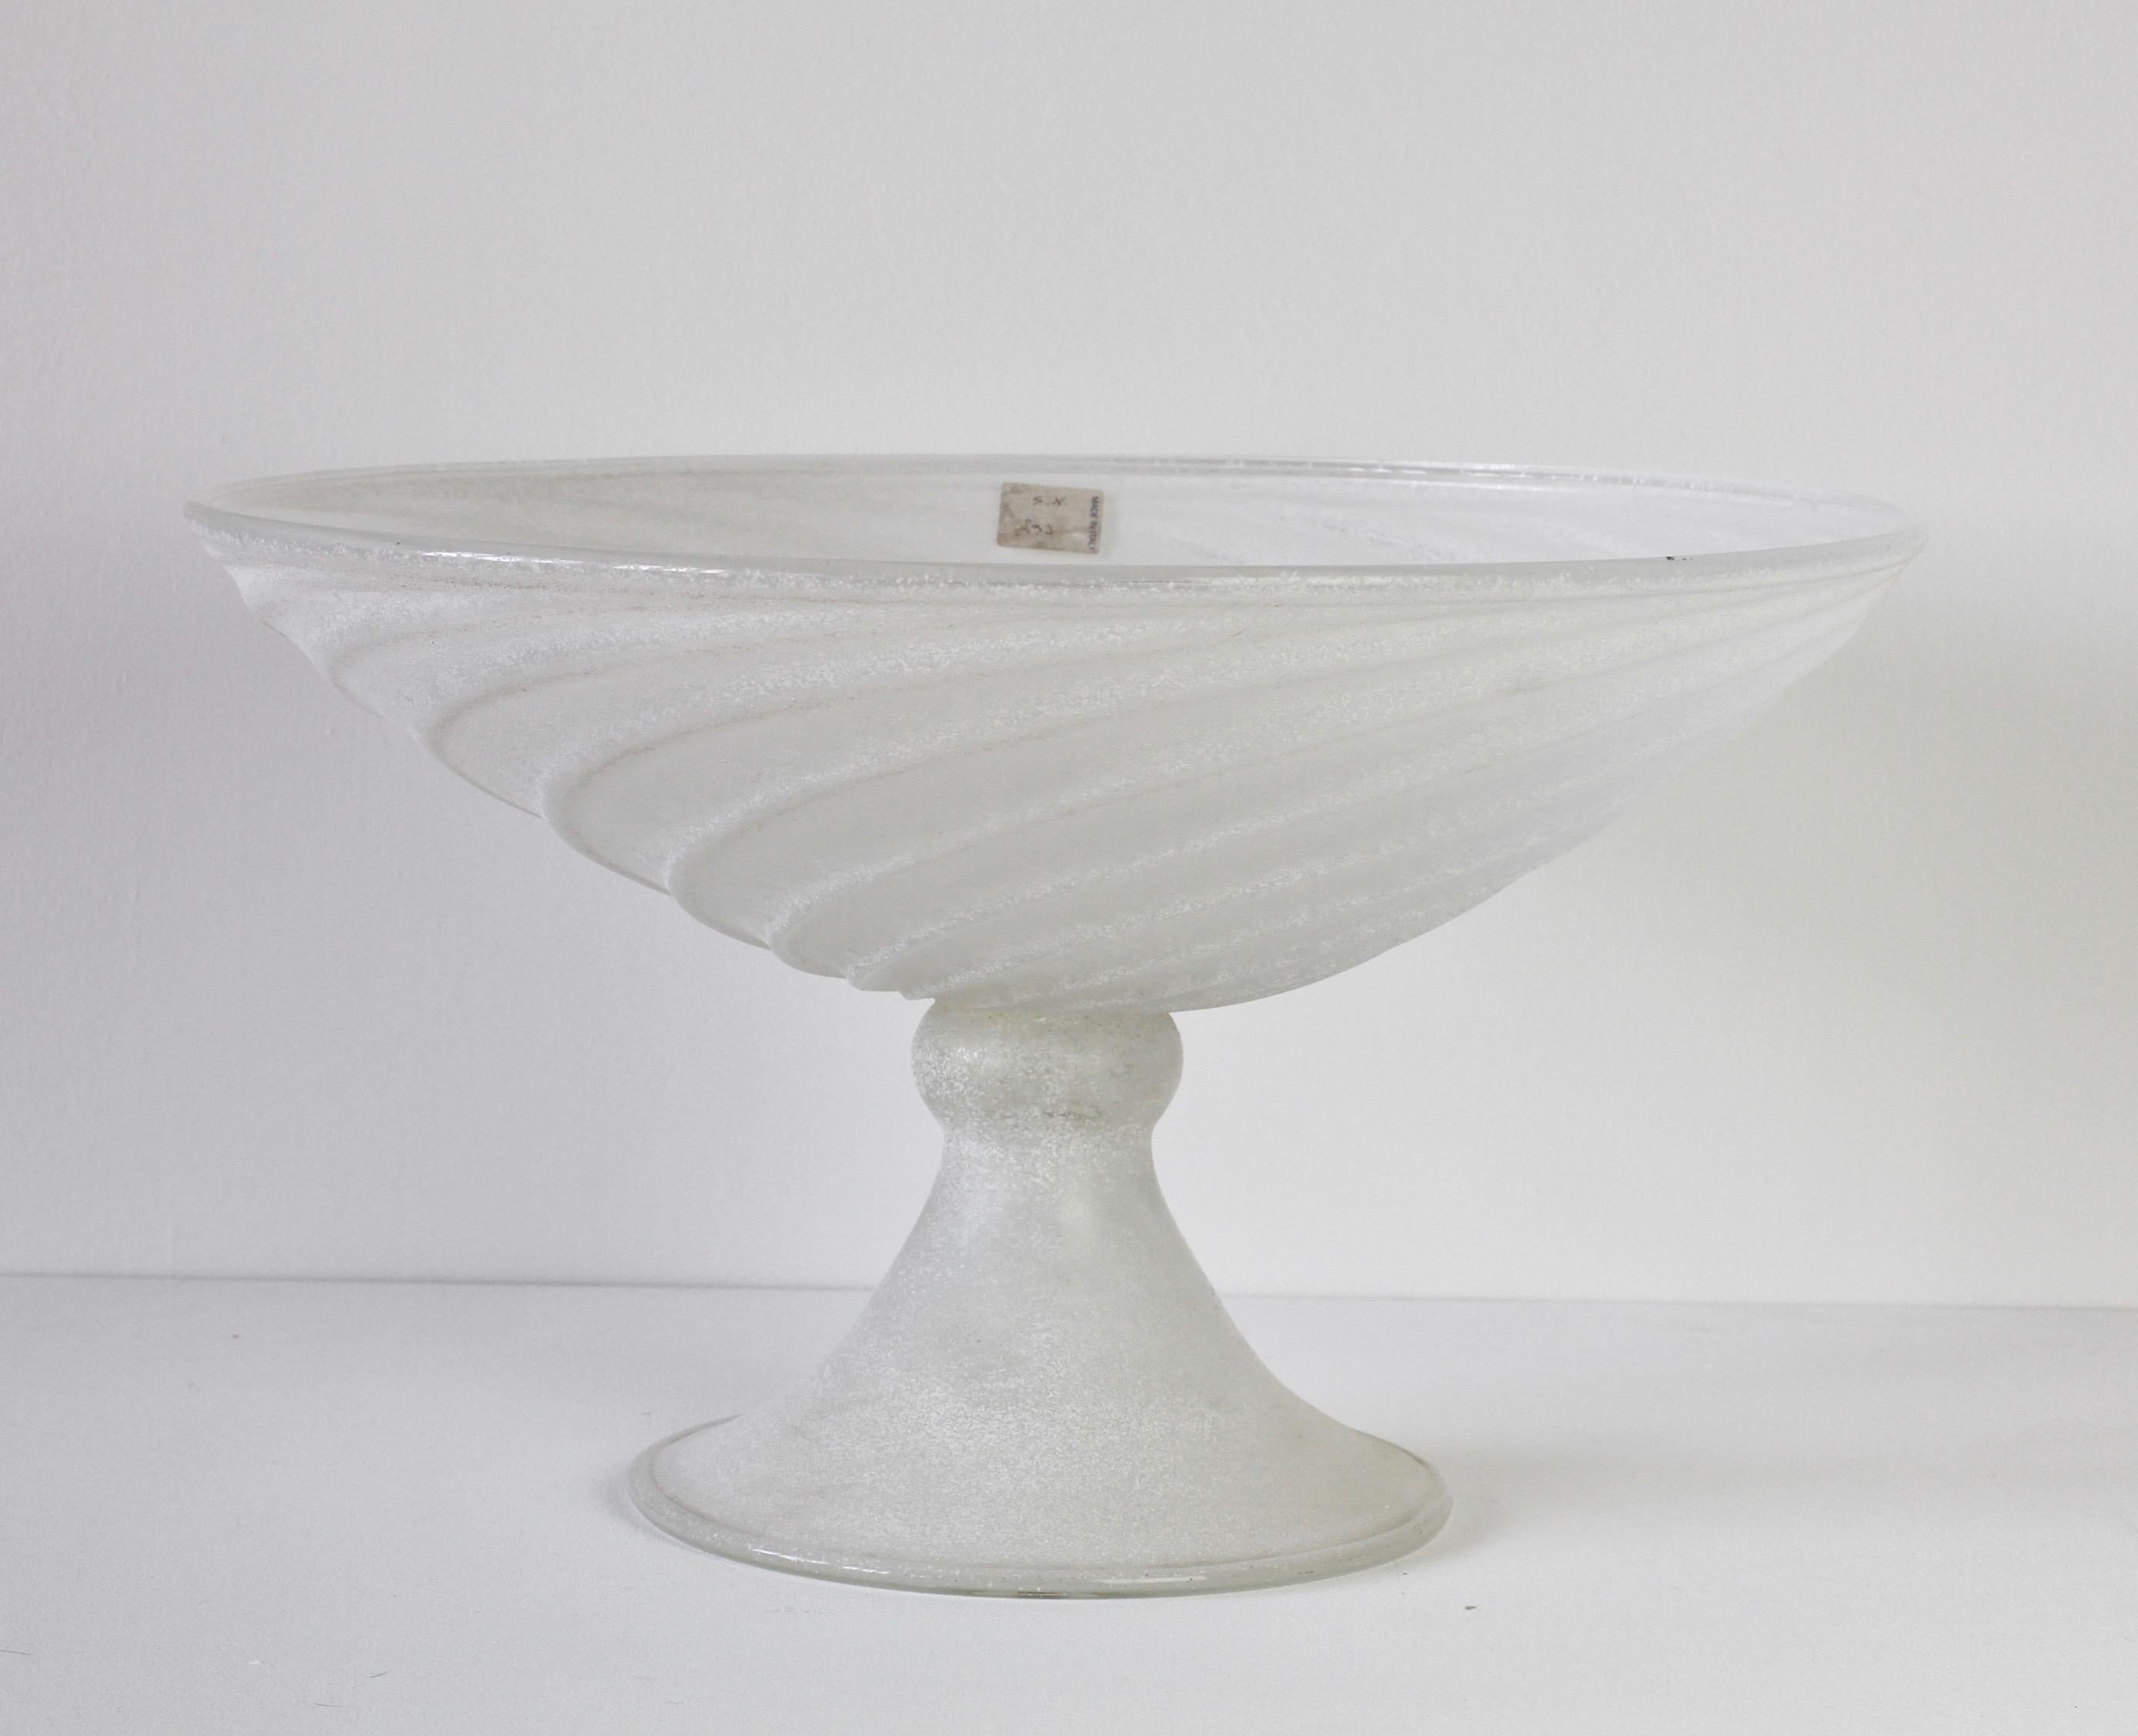 Seguso Vetri d'Arte white 'a Scavo' centrepiece bowl circa 1980s. Karl Springer designed many pieces for Seguso in the 1980s. Typically, these pieces were either white, black or brown/amber glass using the 'a Scavo' technique and of a large,